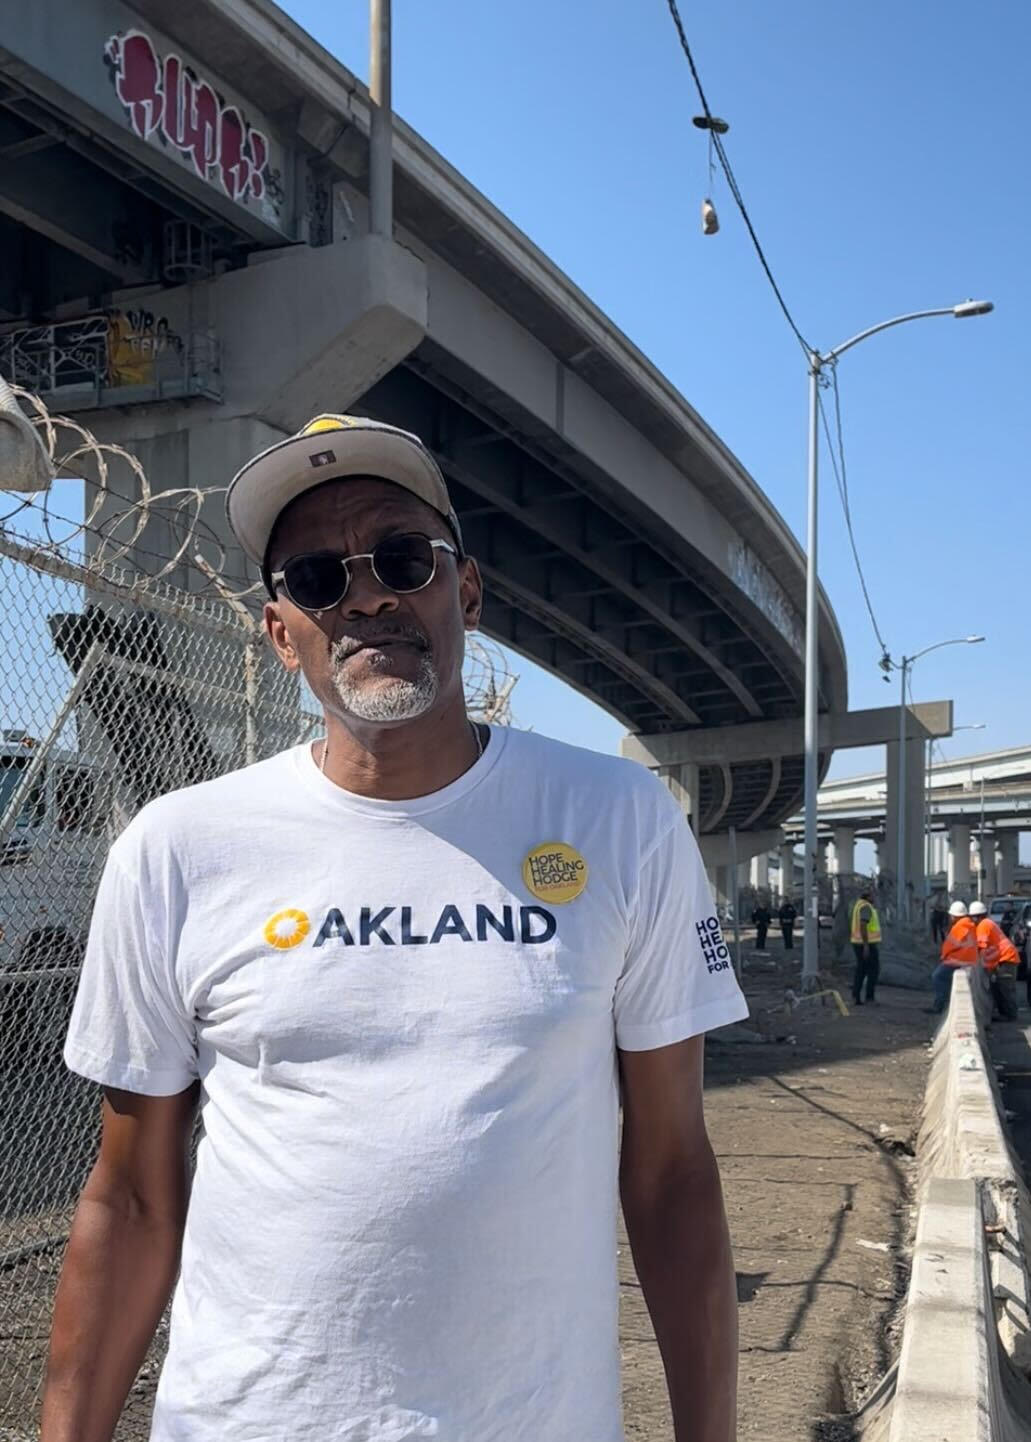 Greg Hodge, a mayoral candidate, long time West Oakland resident and parent who lives near several homeless encampments want the city to provide "equity-based" solutions around Secty. Buttigieg's and Gov. Newsom's recent statements on displacements and homelessness.